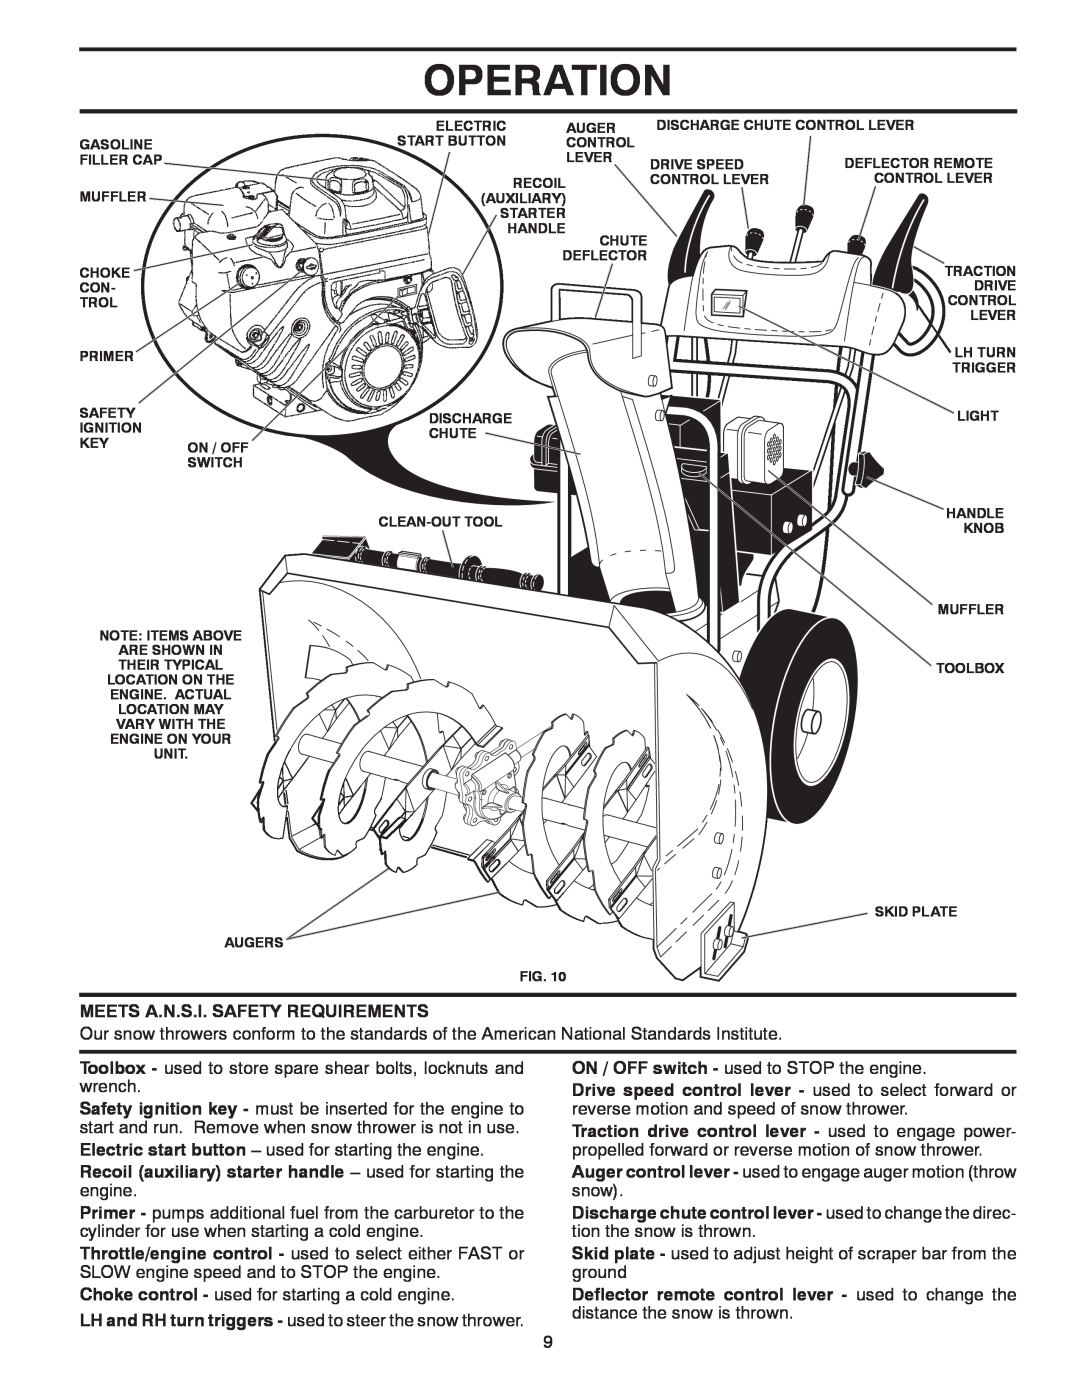 Poulan 438361, 96192004600, PR8P27ES owner manual Operation, Meets A.N.S.I. Safety Requirements 